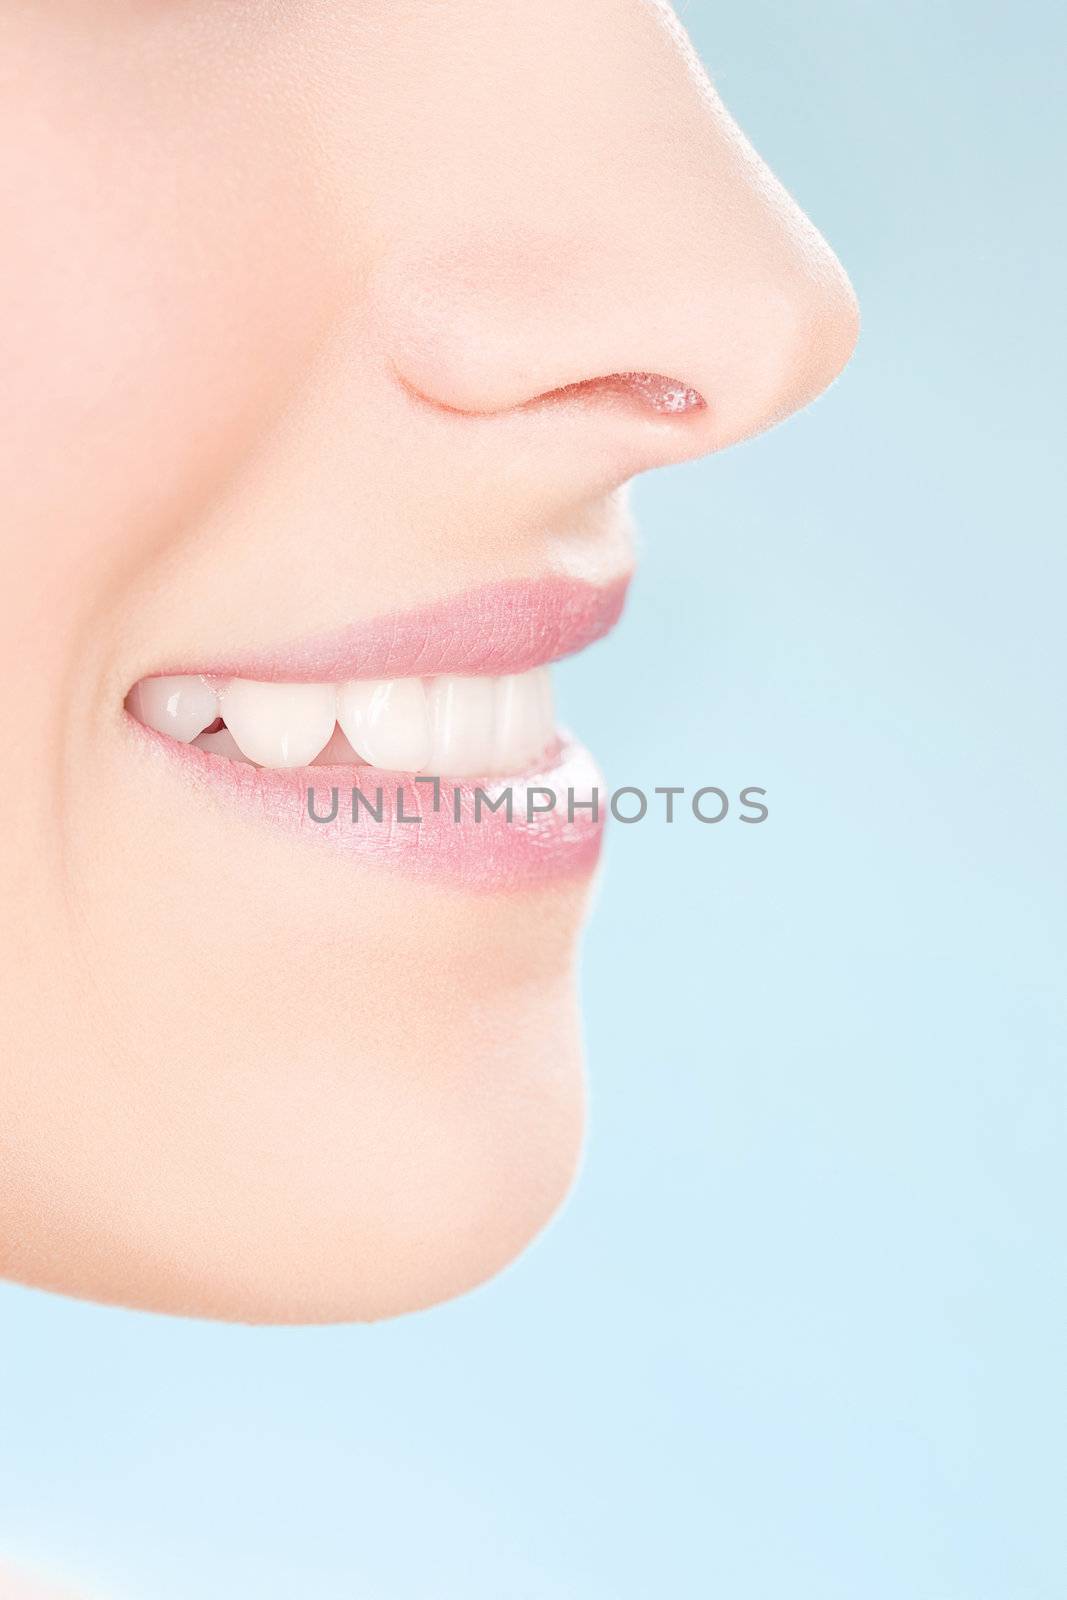 Part of a woman's face; Health concept